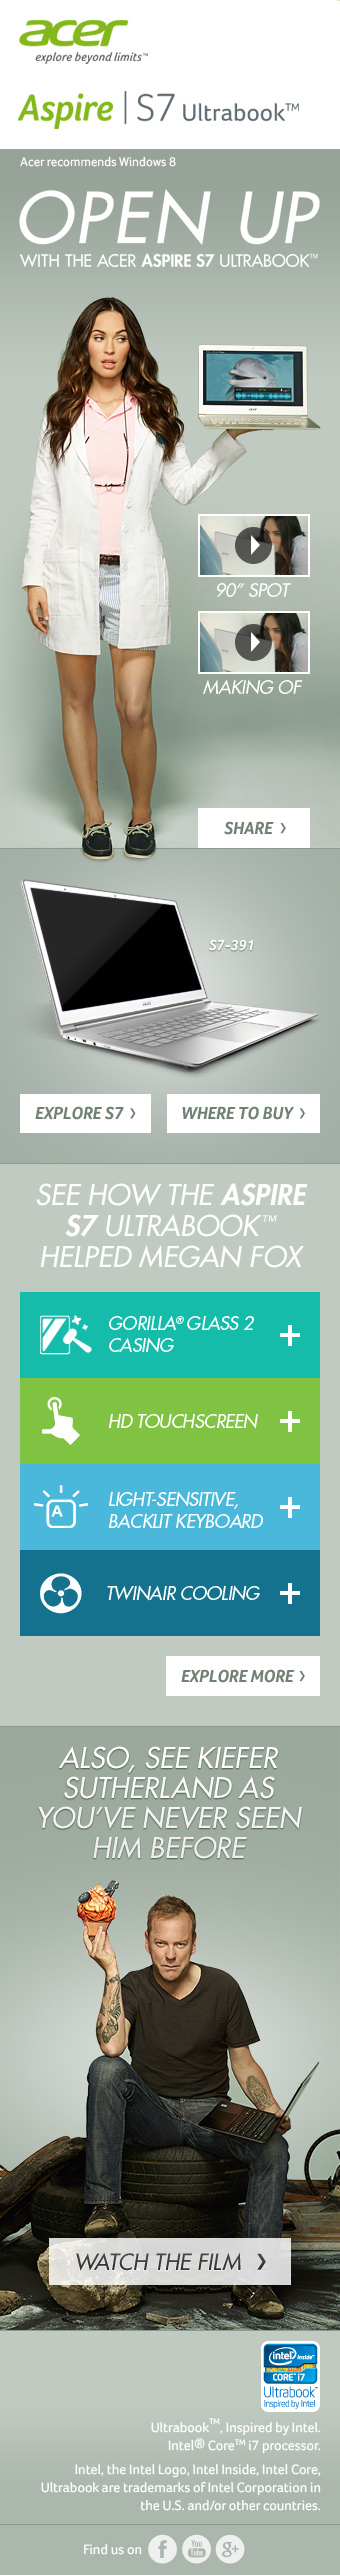 acer Aspire S7  megan fox landing page campaign dolphin css html5 notebook mother london